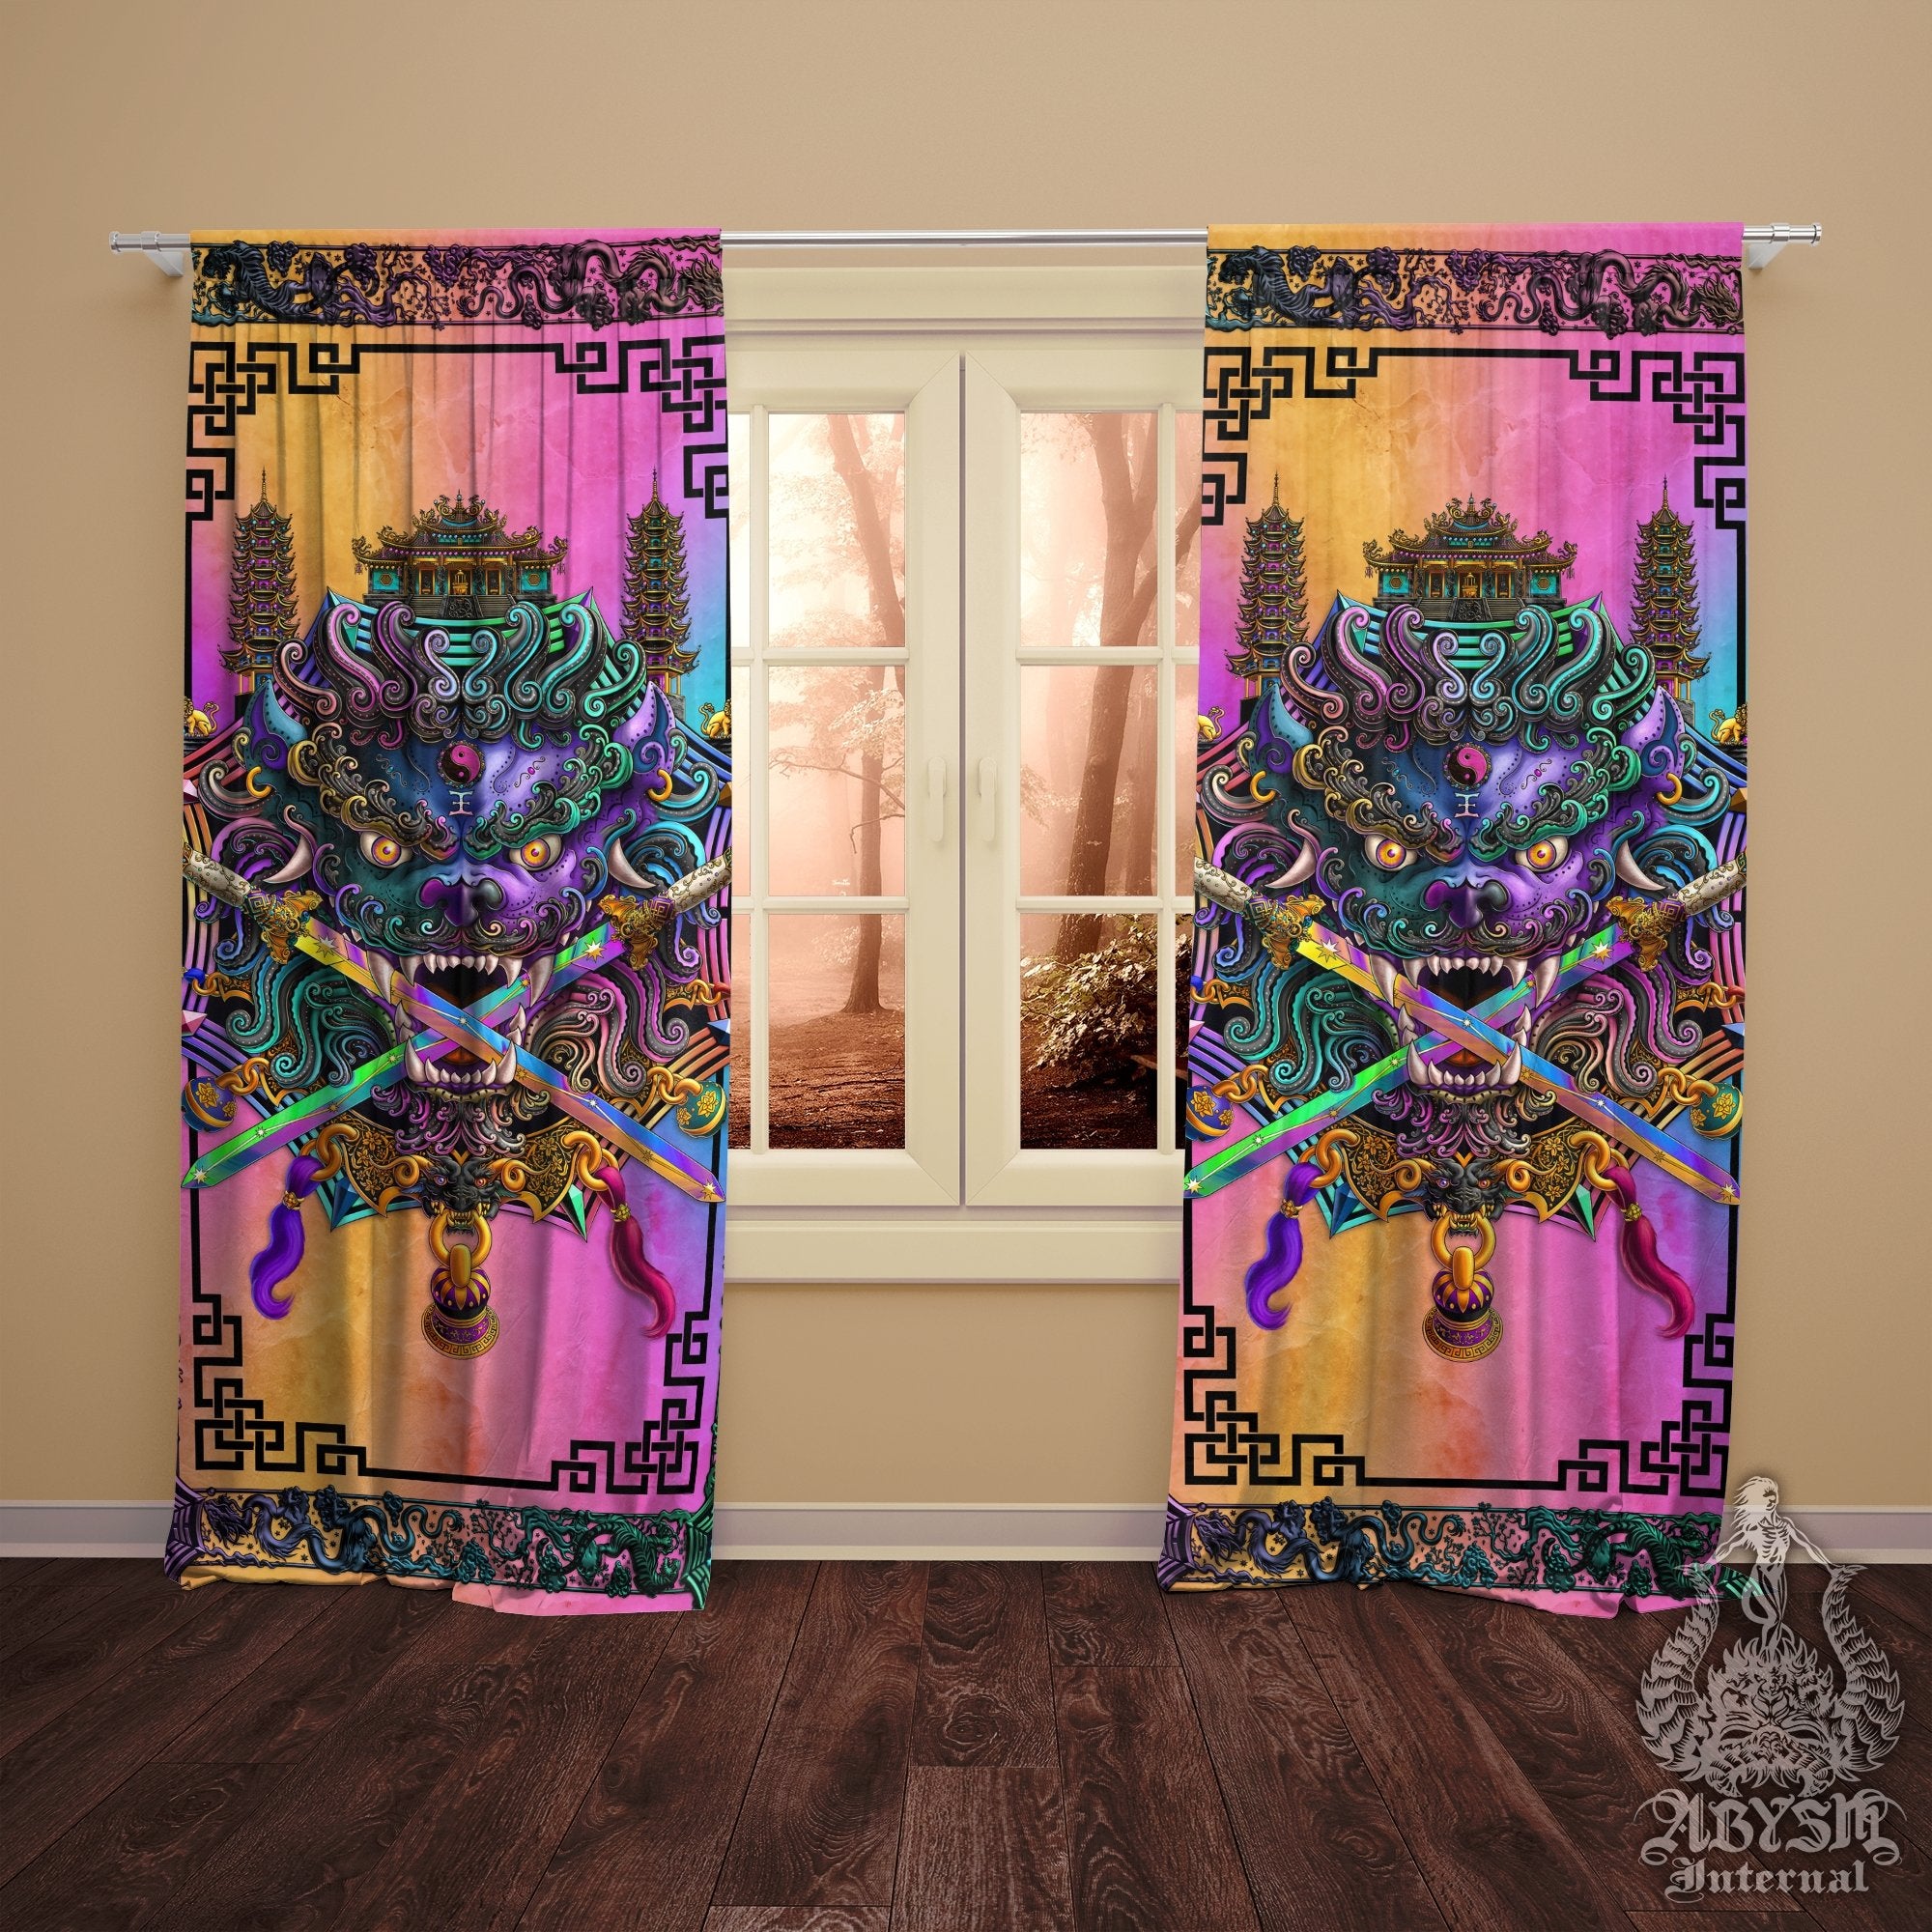 Psychedelic Blackout Curtains, Chinese Long Window Panels, Taiwan Sword Lion, Aesthetic and Game Room Decor, Art Print, Funky and Eclectic Home Decor - Pastel Punk Black - Abysm Internal